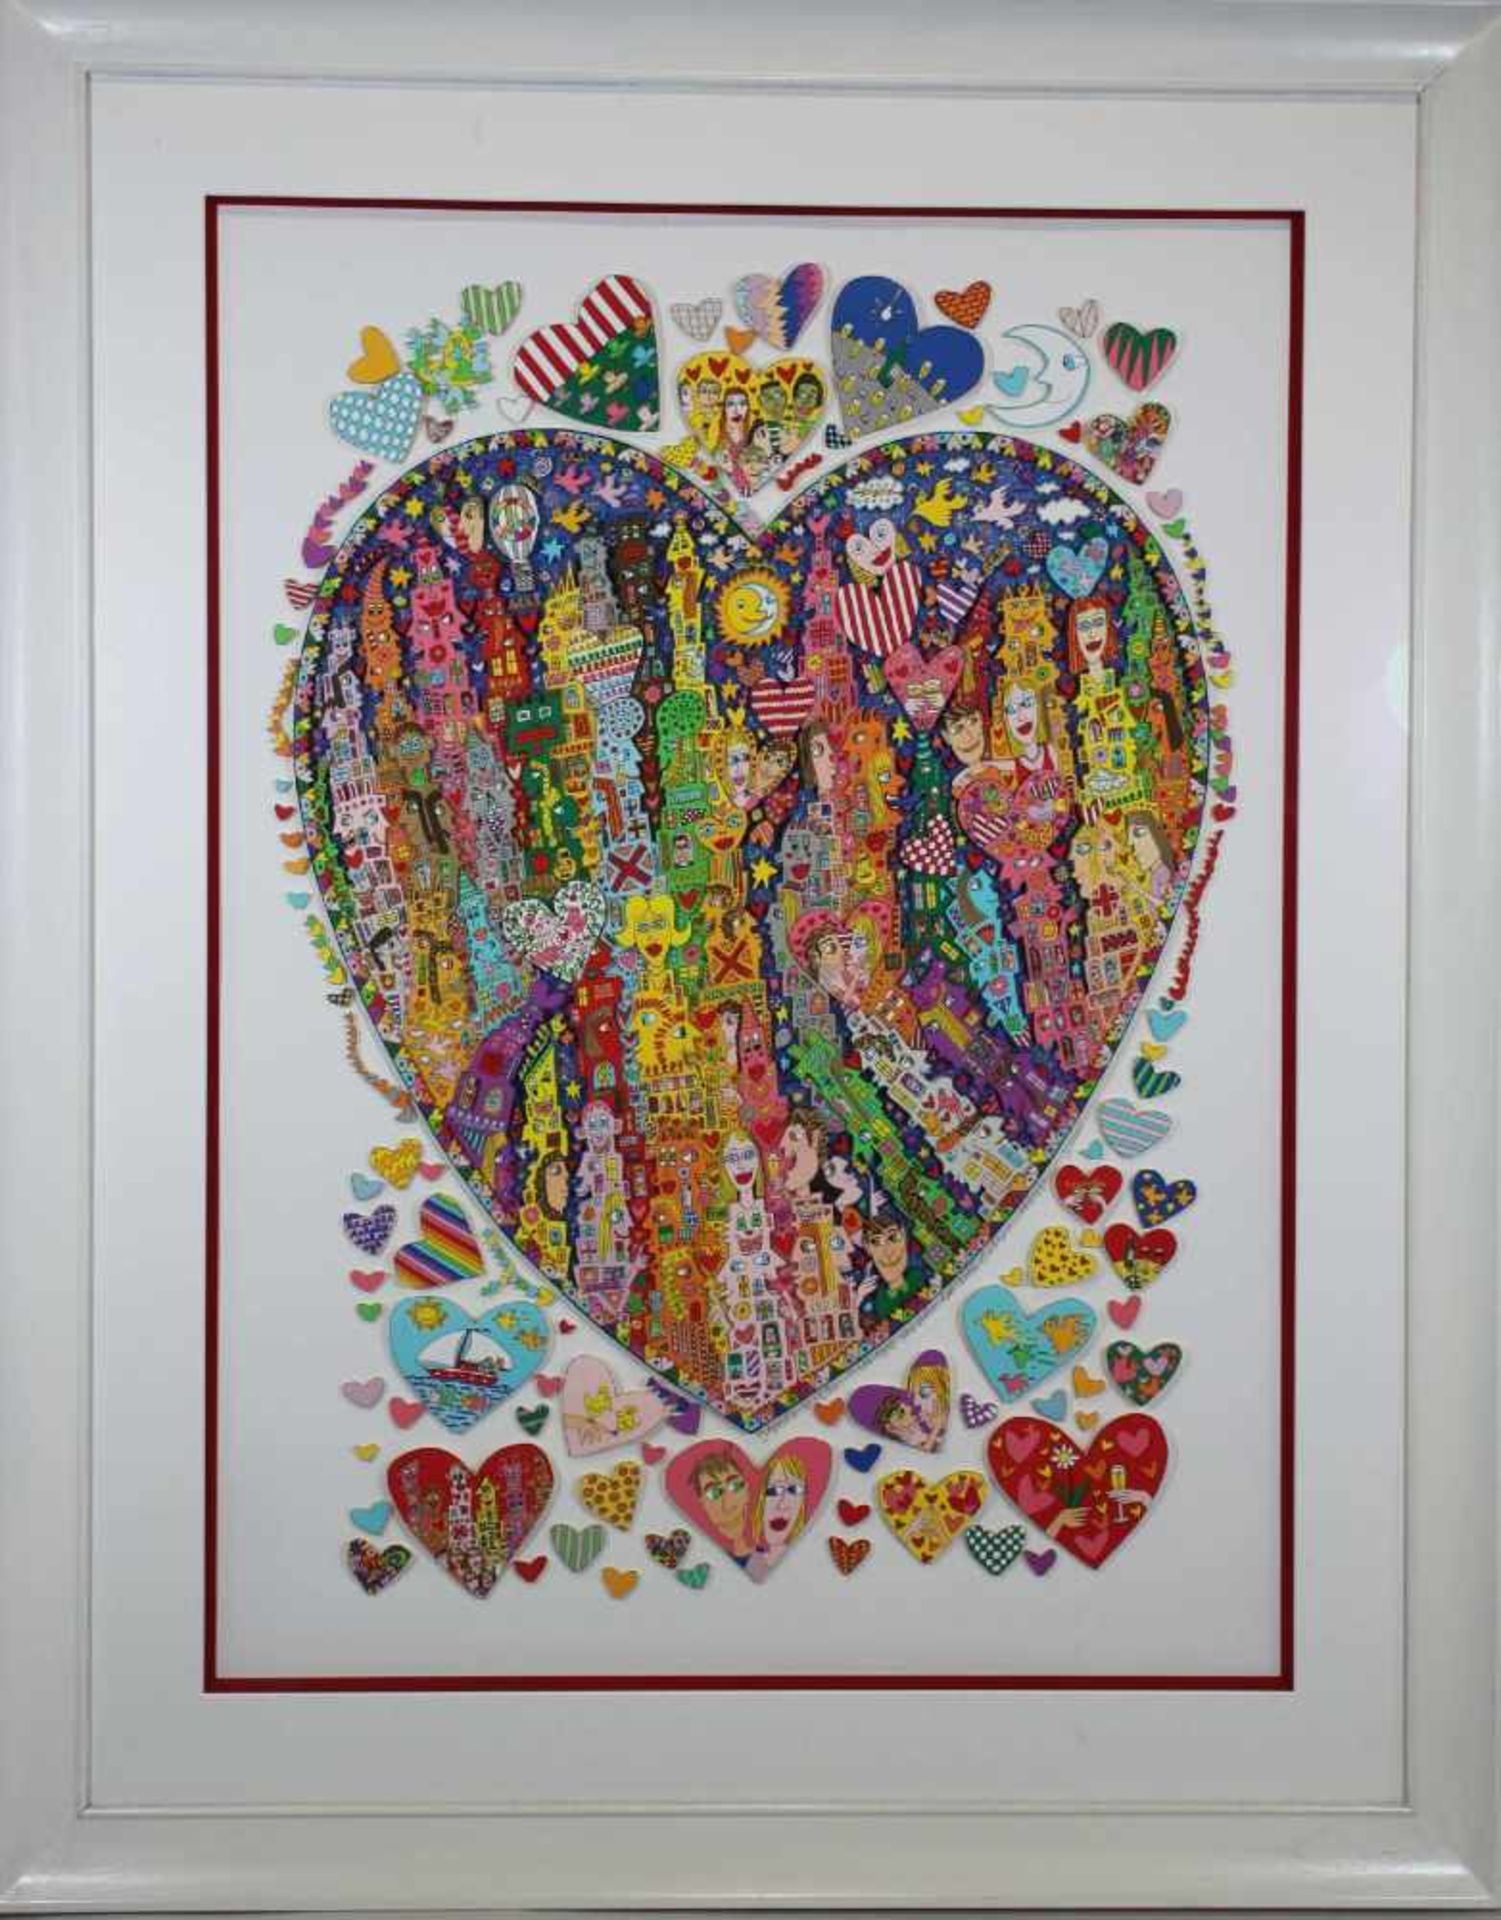 James Rizzi (1950 - 2011), In the heart of the city, 2001, 3-D Lithografie in Farbe, mit Bl. - Bild 2 aus 3